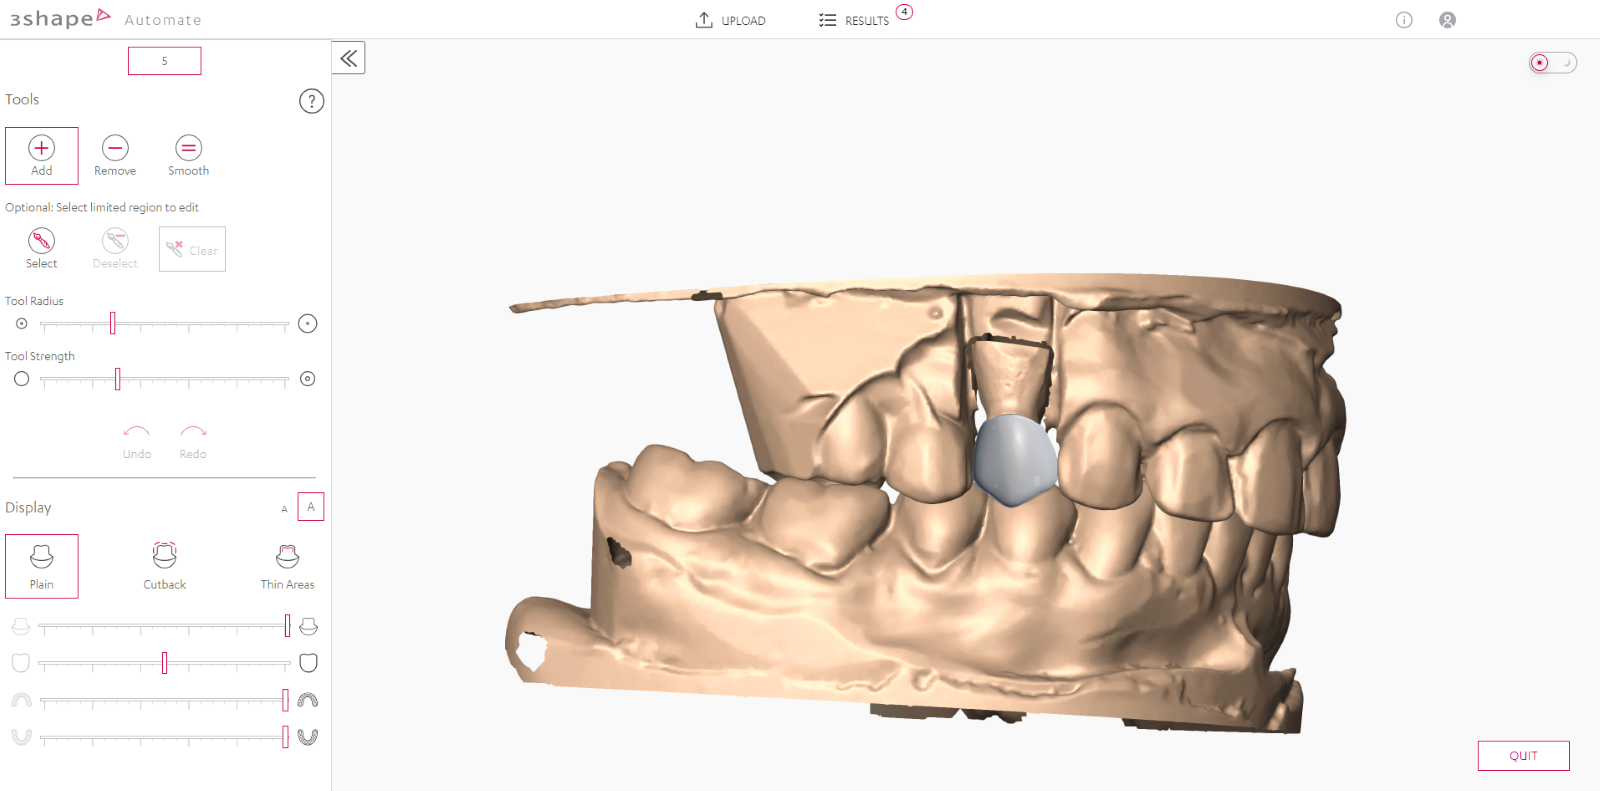 A close-up of a model of a human jaw

Description automatically generated